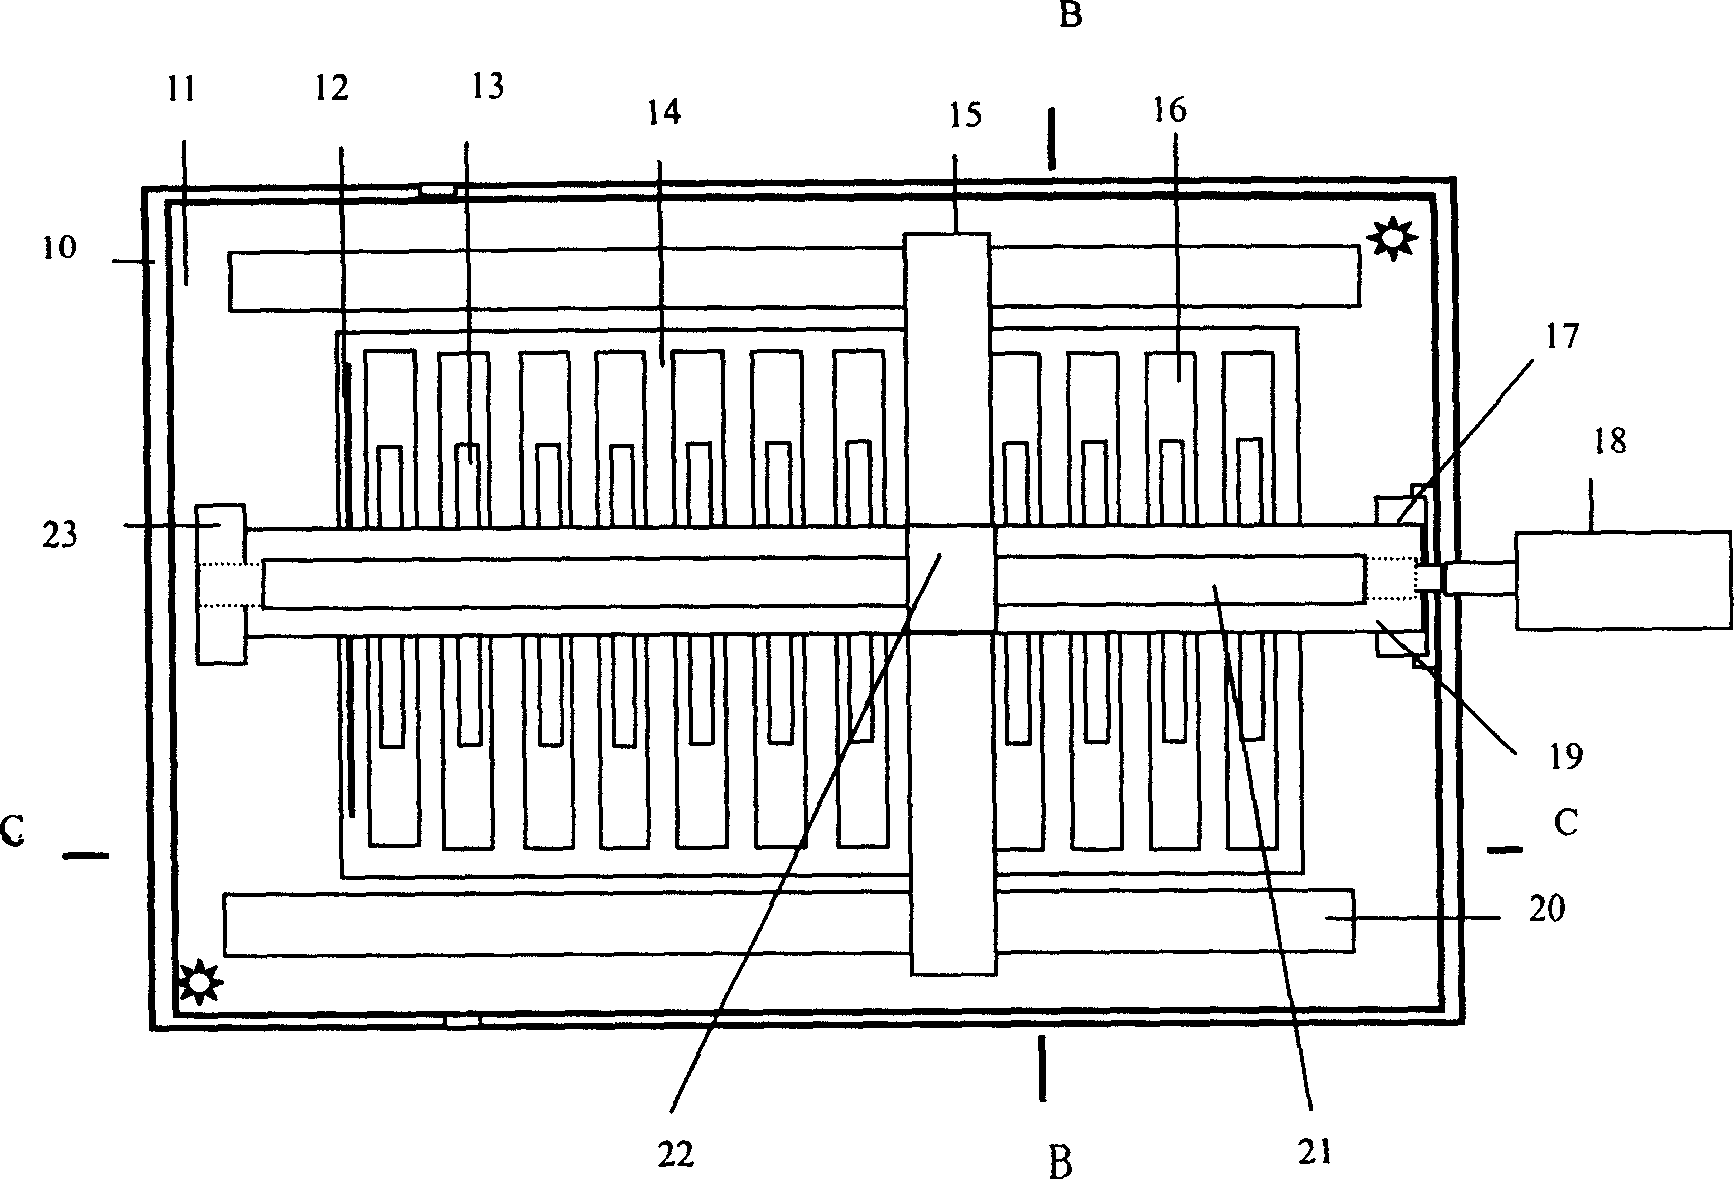 Apparatus for testing cement-based material deformation under multiple environmental conditions